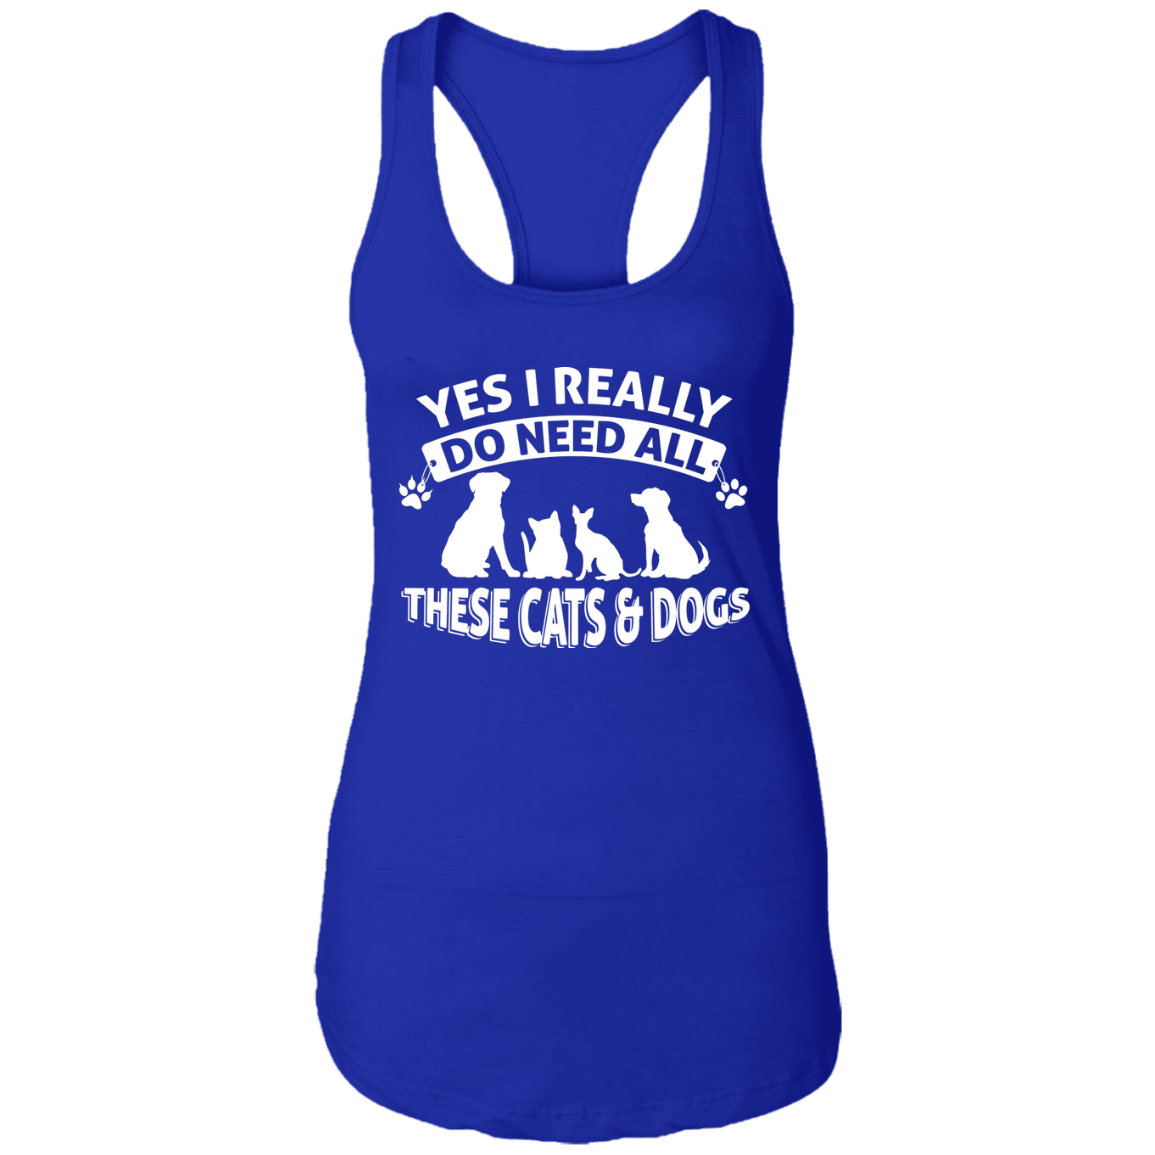 Yers I Do Need All These Cats & Dogs - Ladies Racer Back Tank.